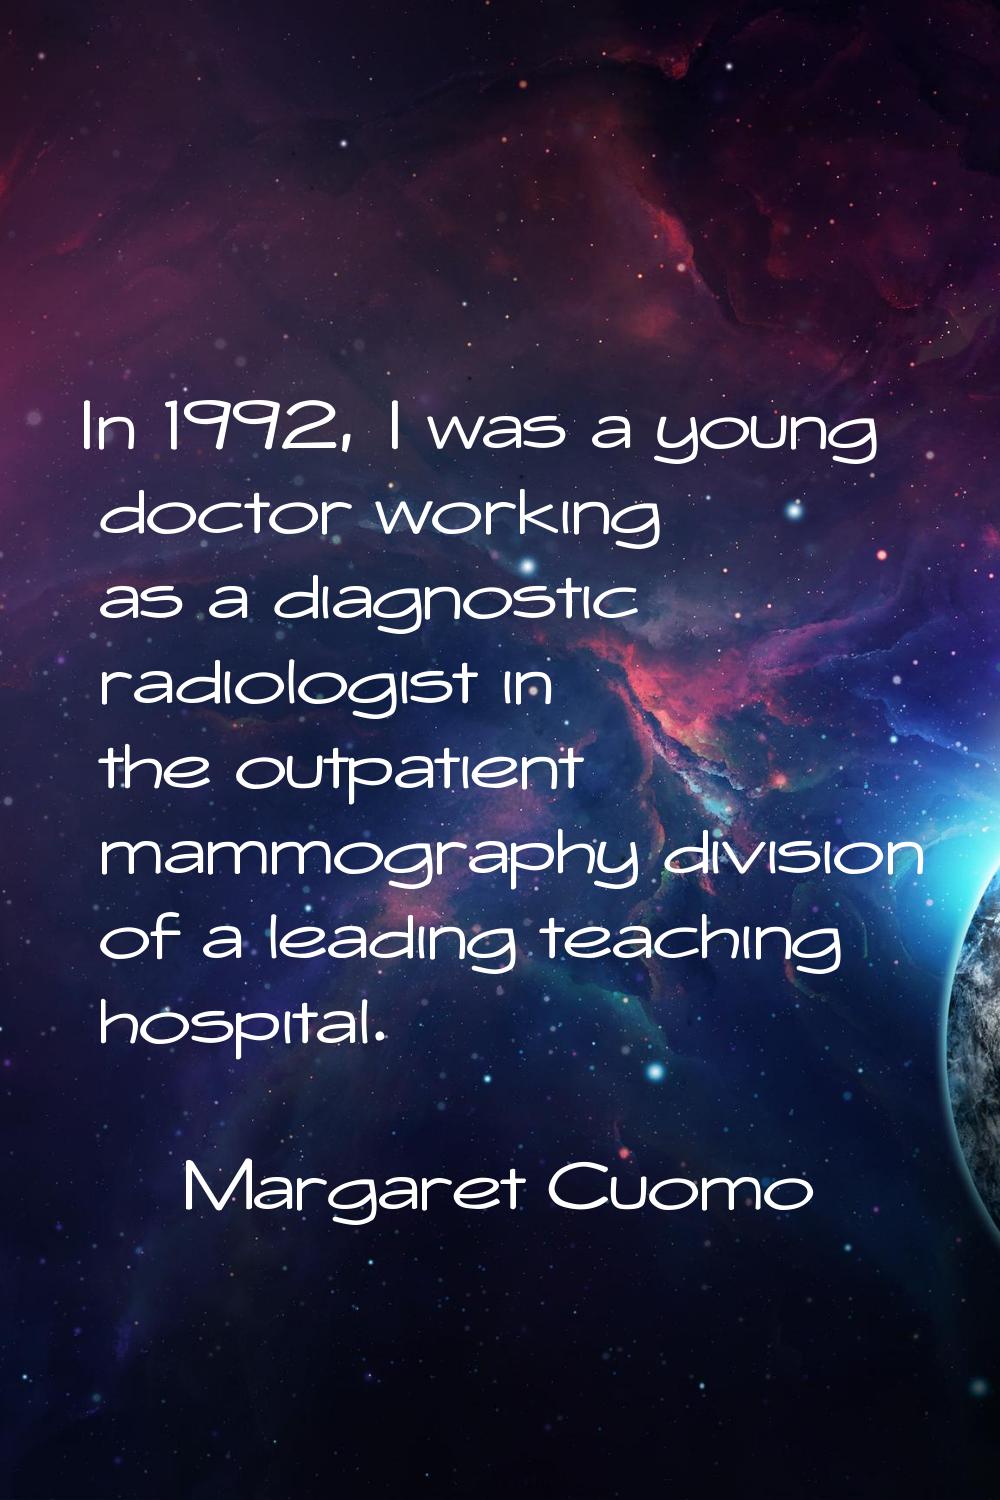 In 1992, I was a young doctor working as a diagnostic radiologist in the outpatient mammography div